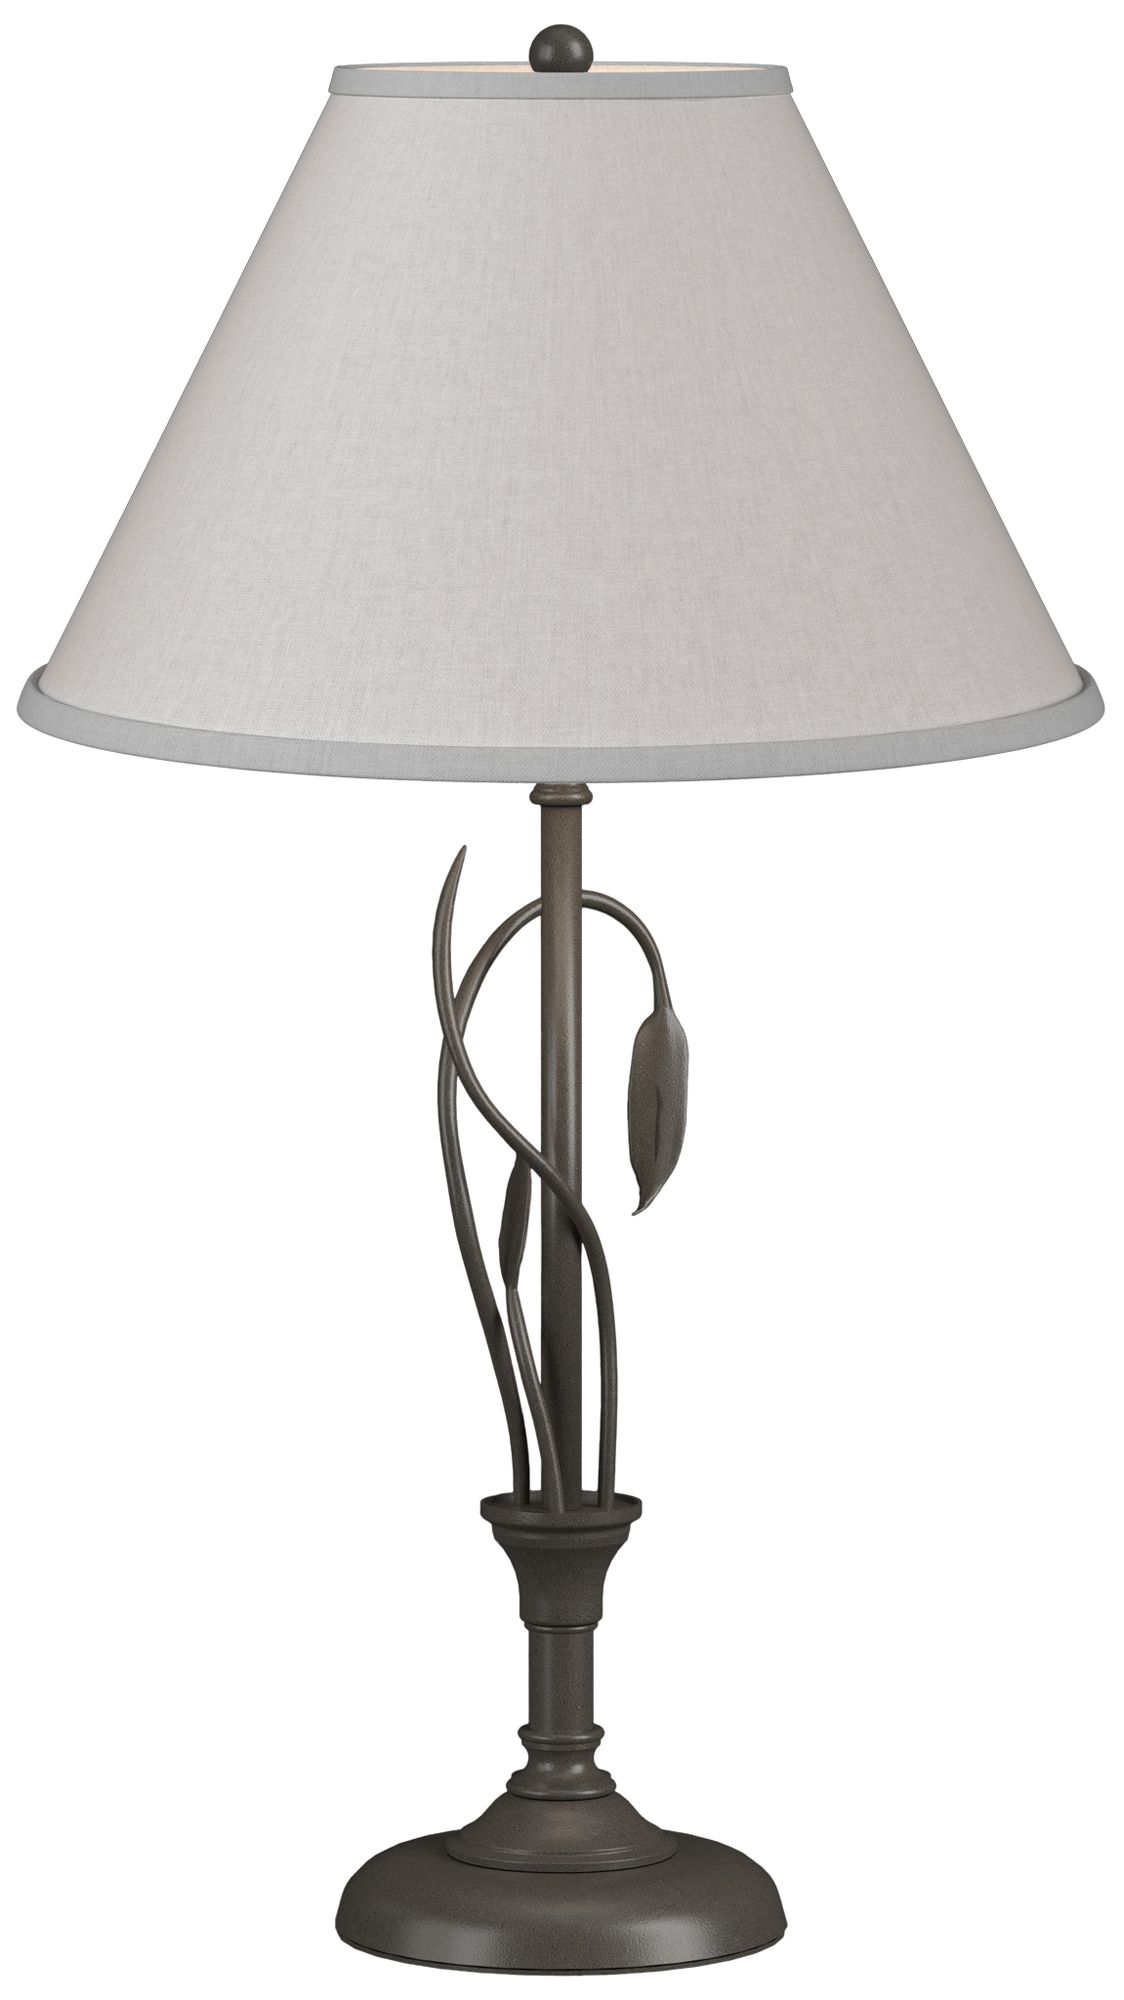 Forged Leaves and Vase 26.4"H Dark Smoke Table Lamp w/ Light Grey Shad